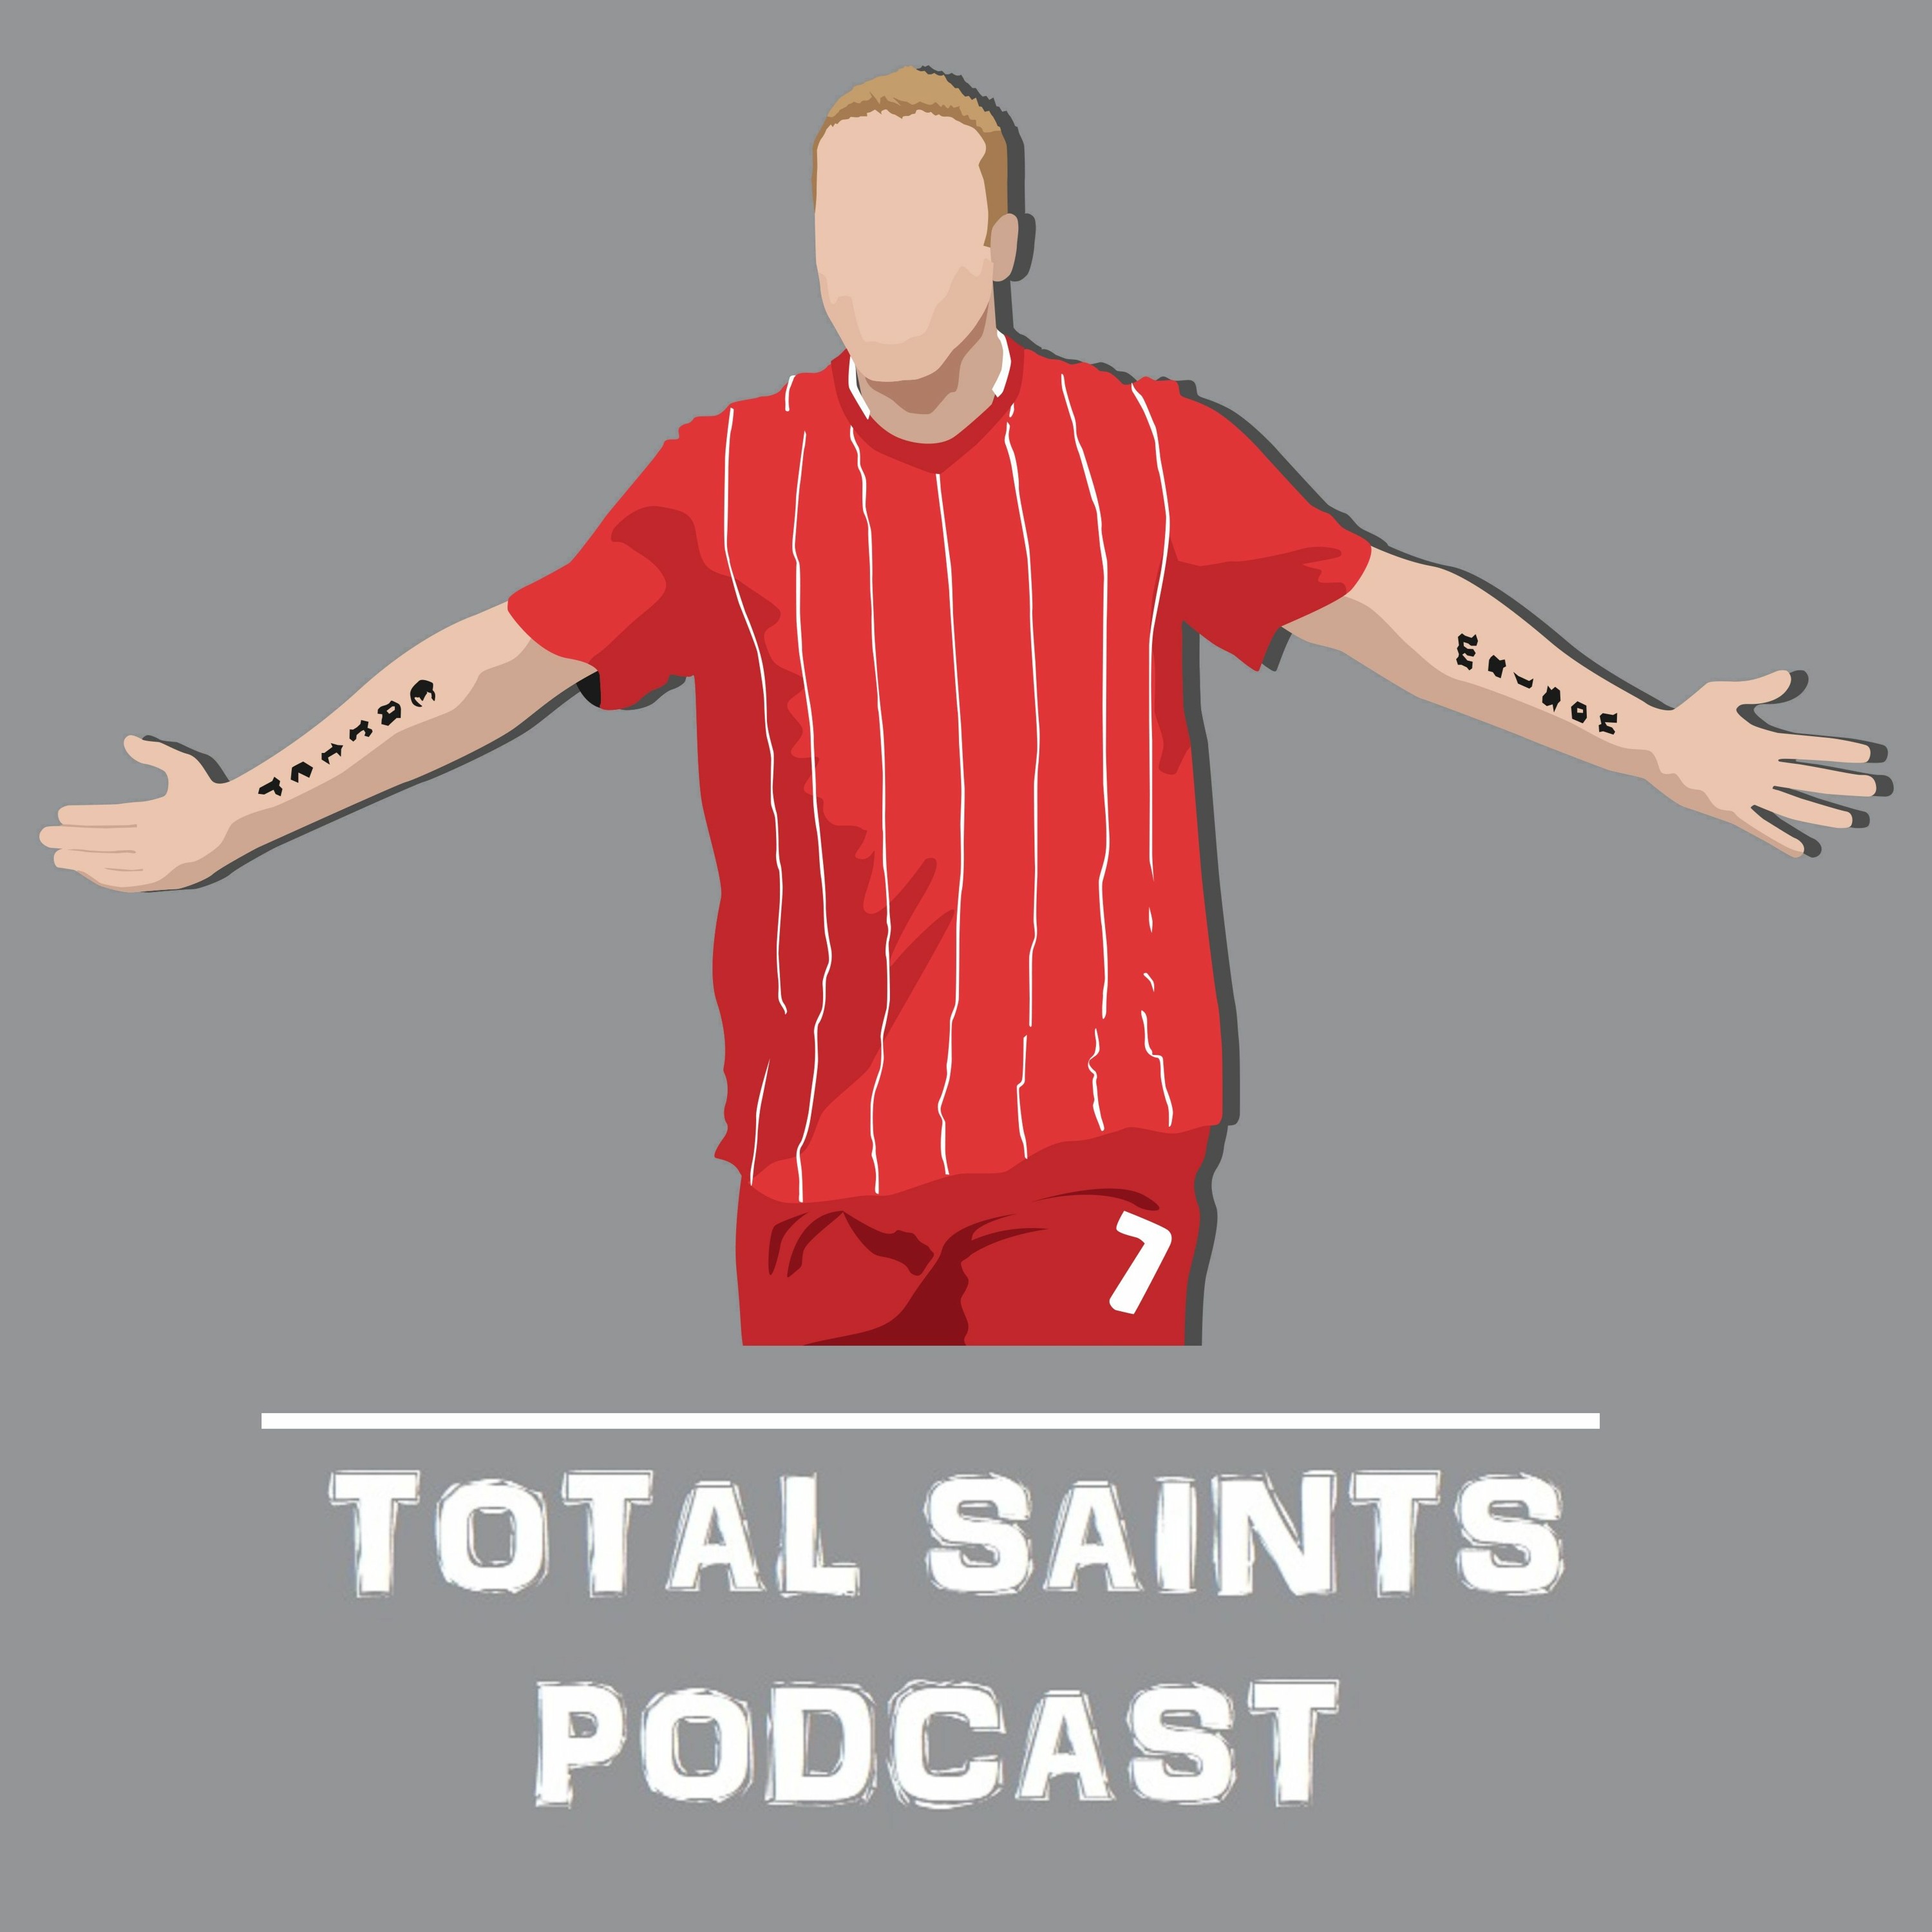 Episode 141 (Rickie Lambert Special) - Total Saints Podcast